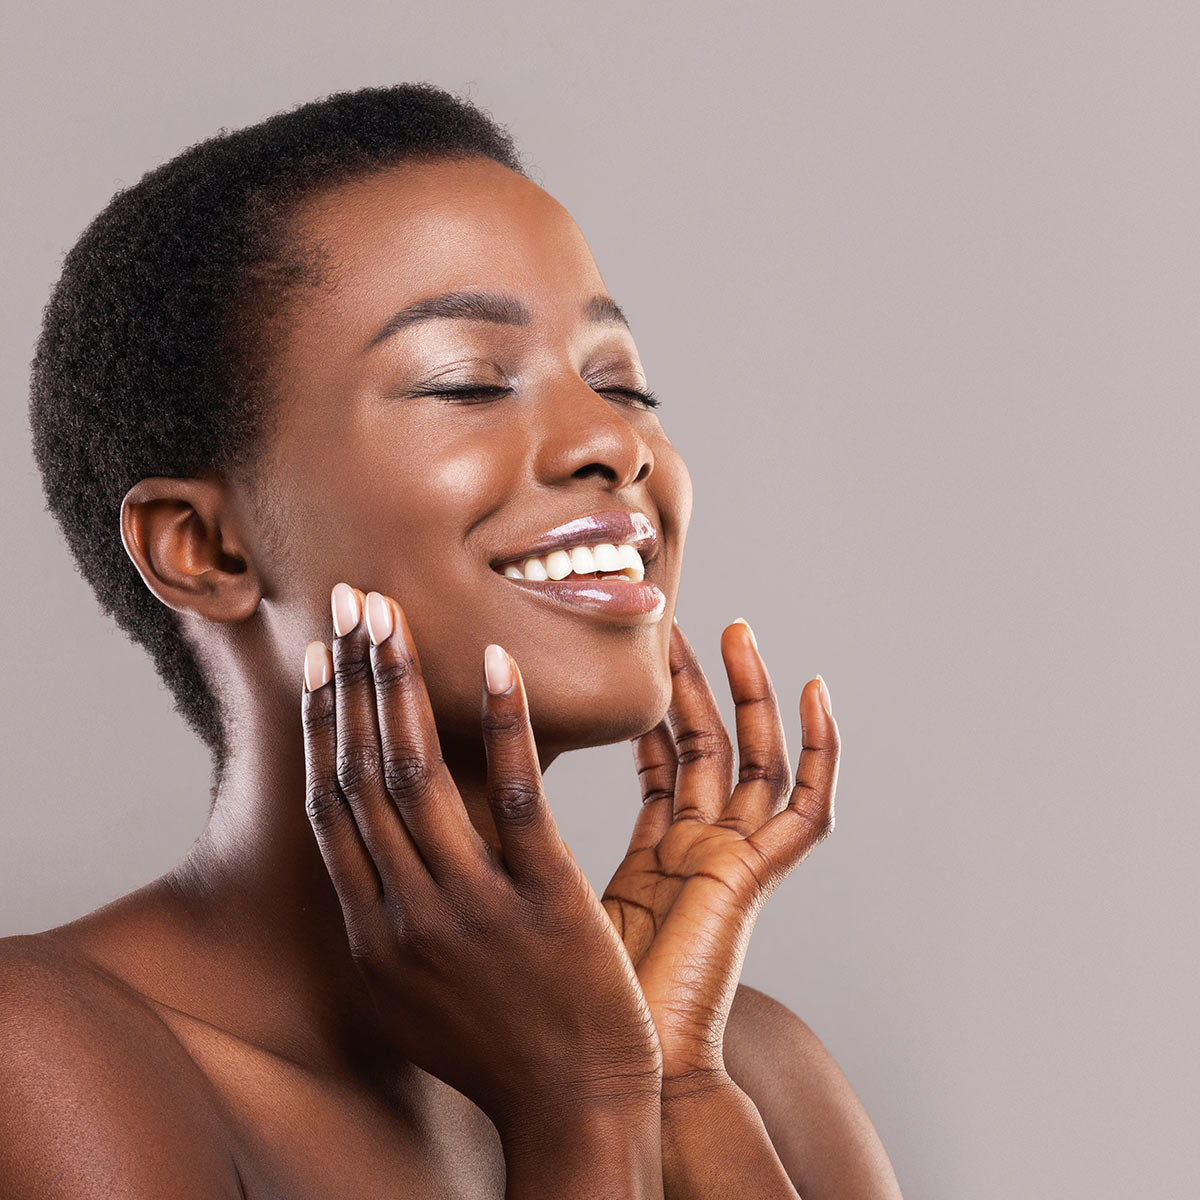 HOW TO GET CLEAN AND SMOOTH SKIN: TIPS FROM DERMATOLOGISTS